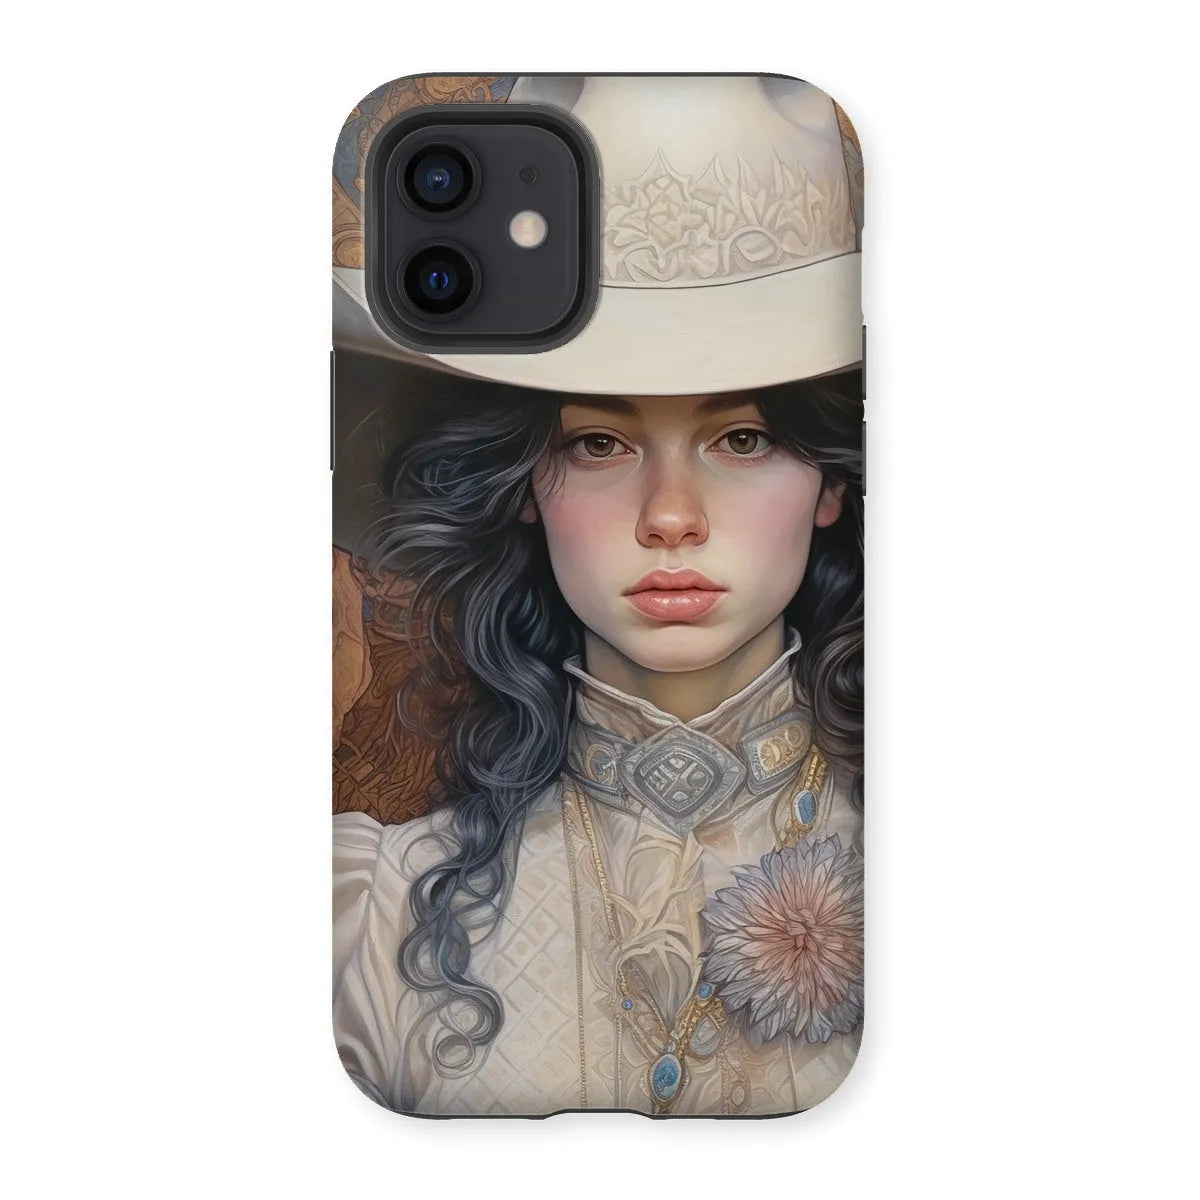 Helena The Lesbian Cowgirl - Sapphic Art Phone Case - Iphone 12 / Matte - Mobile Phone Cases - Aesthetic Art